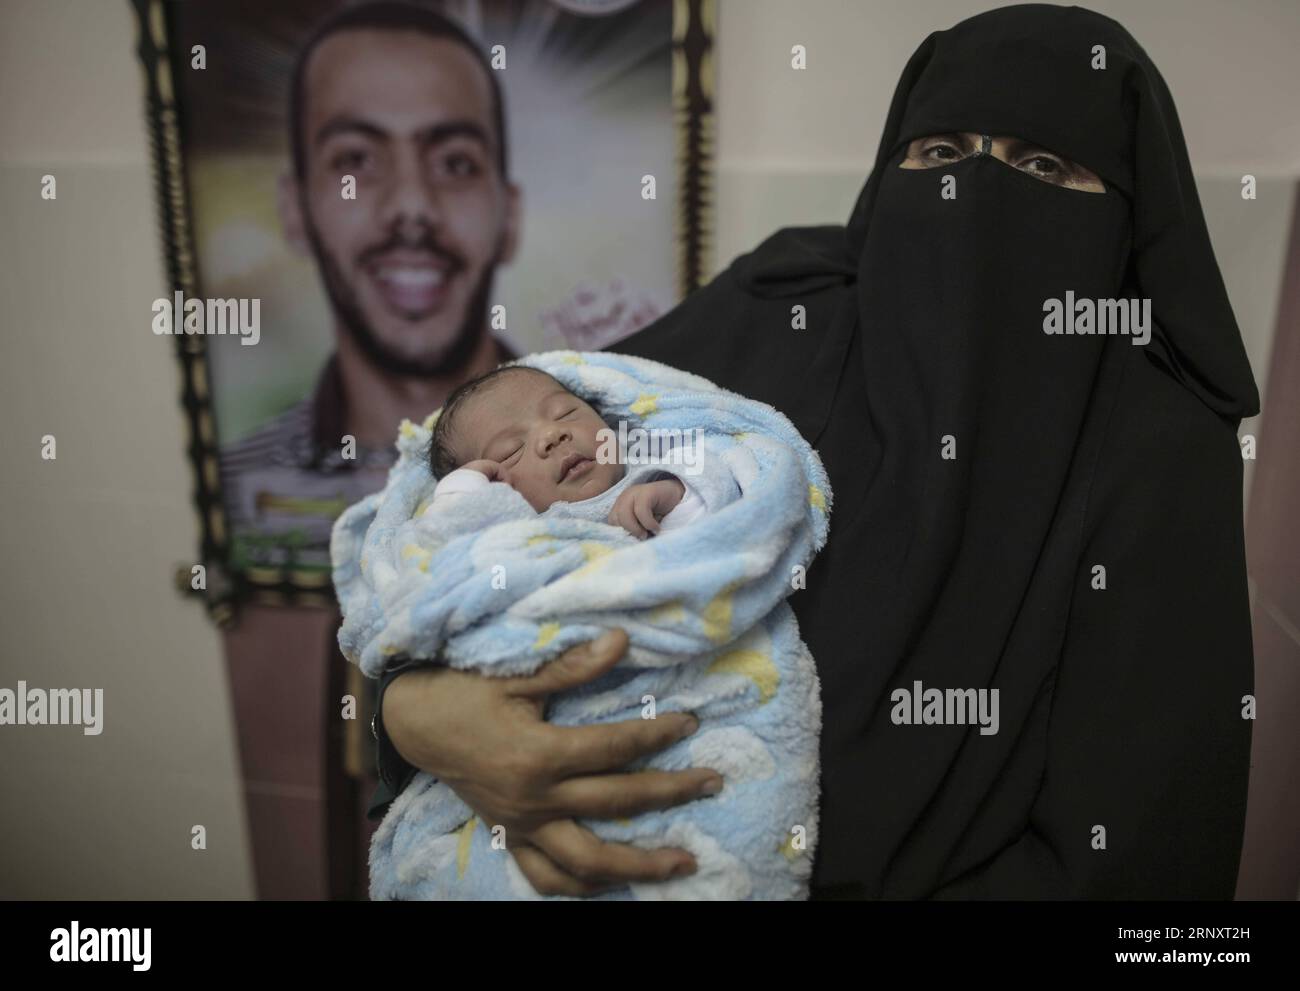 (180211) -- GAZA, Feb. 11, 2018 -- A Palestinian woman holds her newborn baby inside a hospital in Gaza City, on Feb. 11, 2018. The test-tube baby, named Mujahid, has been born with the smuggled sperm of his father who has been sentenced for seven years in Israeli jail. Many Palestinian women with husbands serving long terms in Israeli jails have resorted to sneaking sperm out and getting pregnant. ) MIDEAST-GAZA-SPERM SMUGGLING WissamxNassar PUBLICATIONxNOTxINxCHN Stock Photo